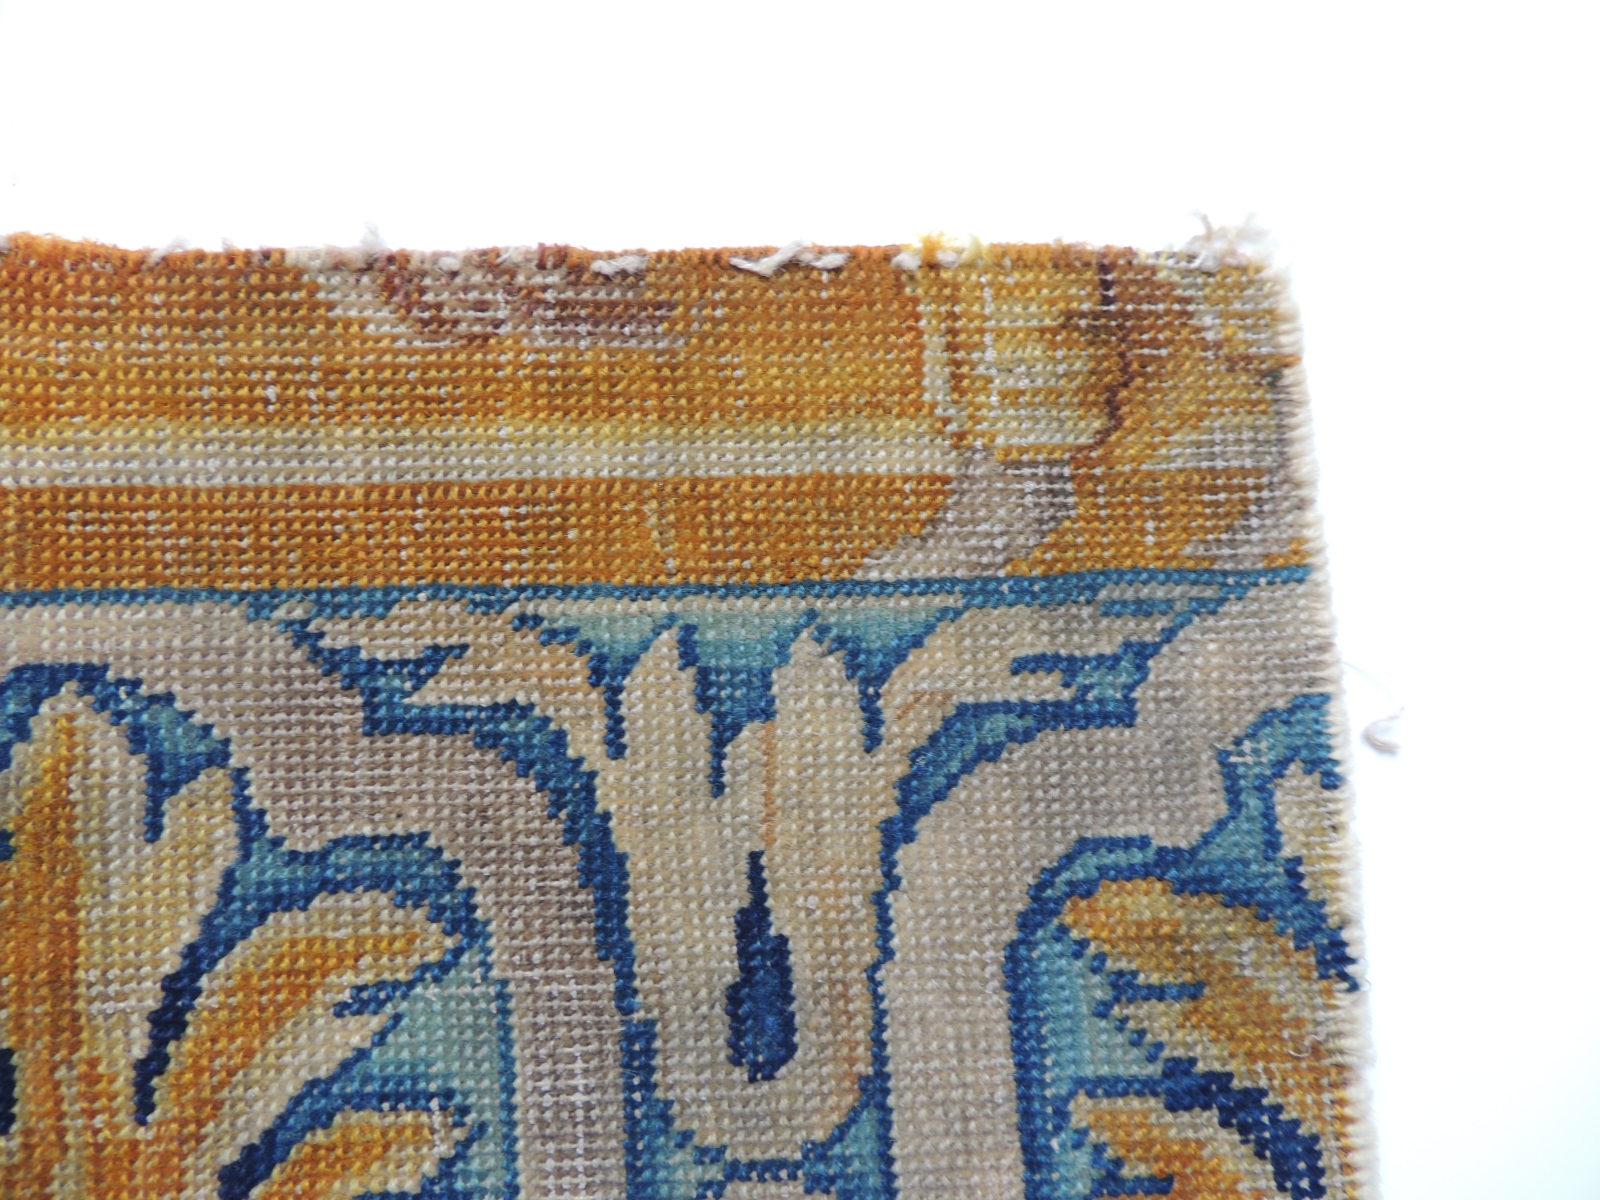 Baroque Revival Antique Gold and Blue Savonnerie Rug Fragment